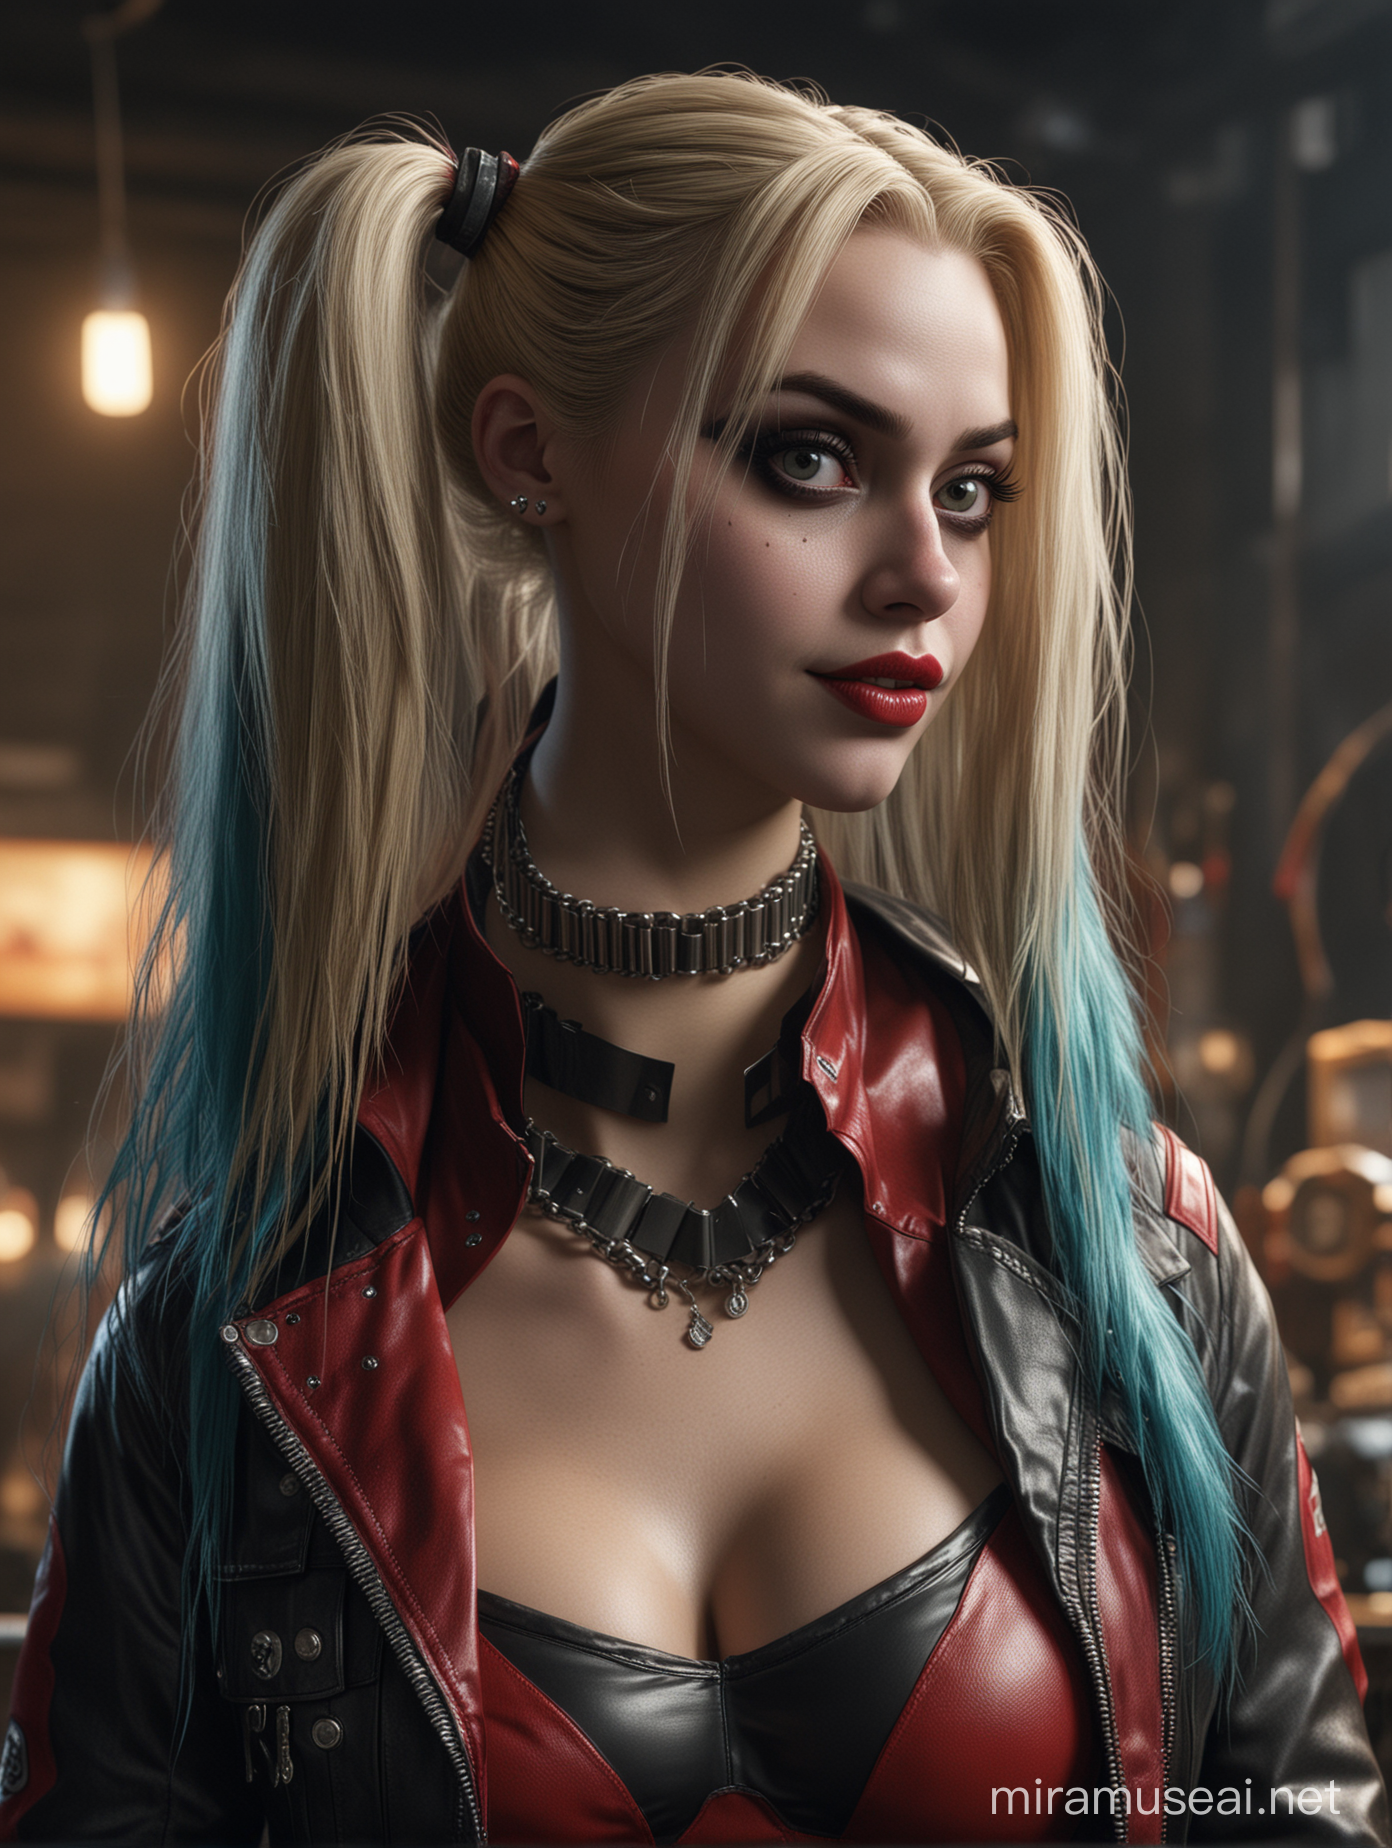 Futuristic Photorealistic Harley Quinn with Long Hair in Bitcoin Mining Industry